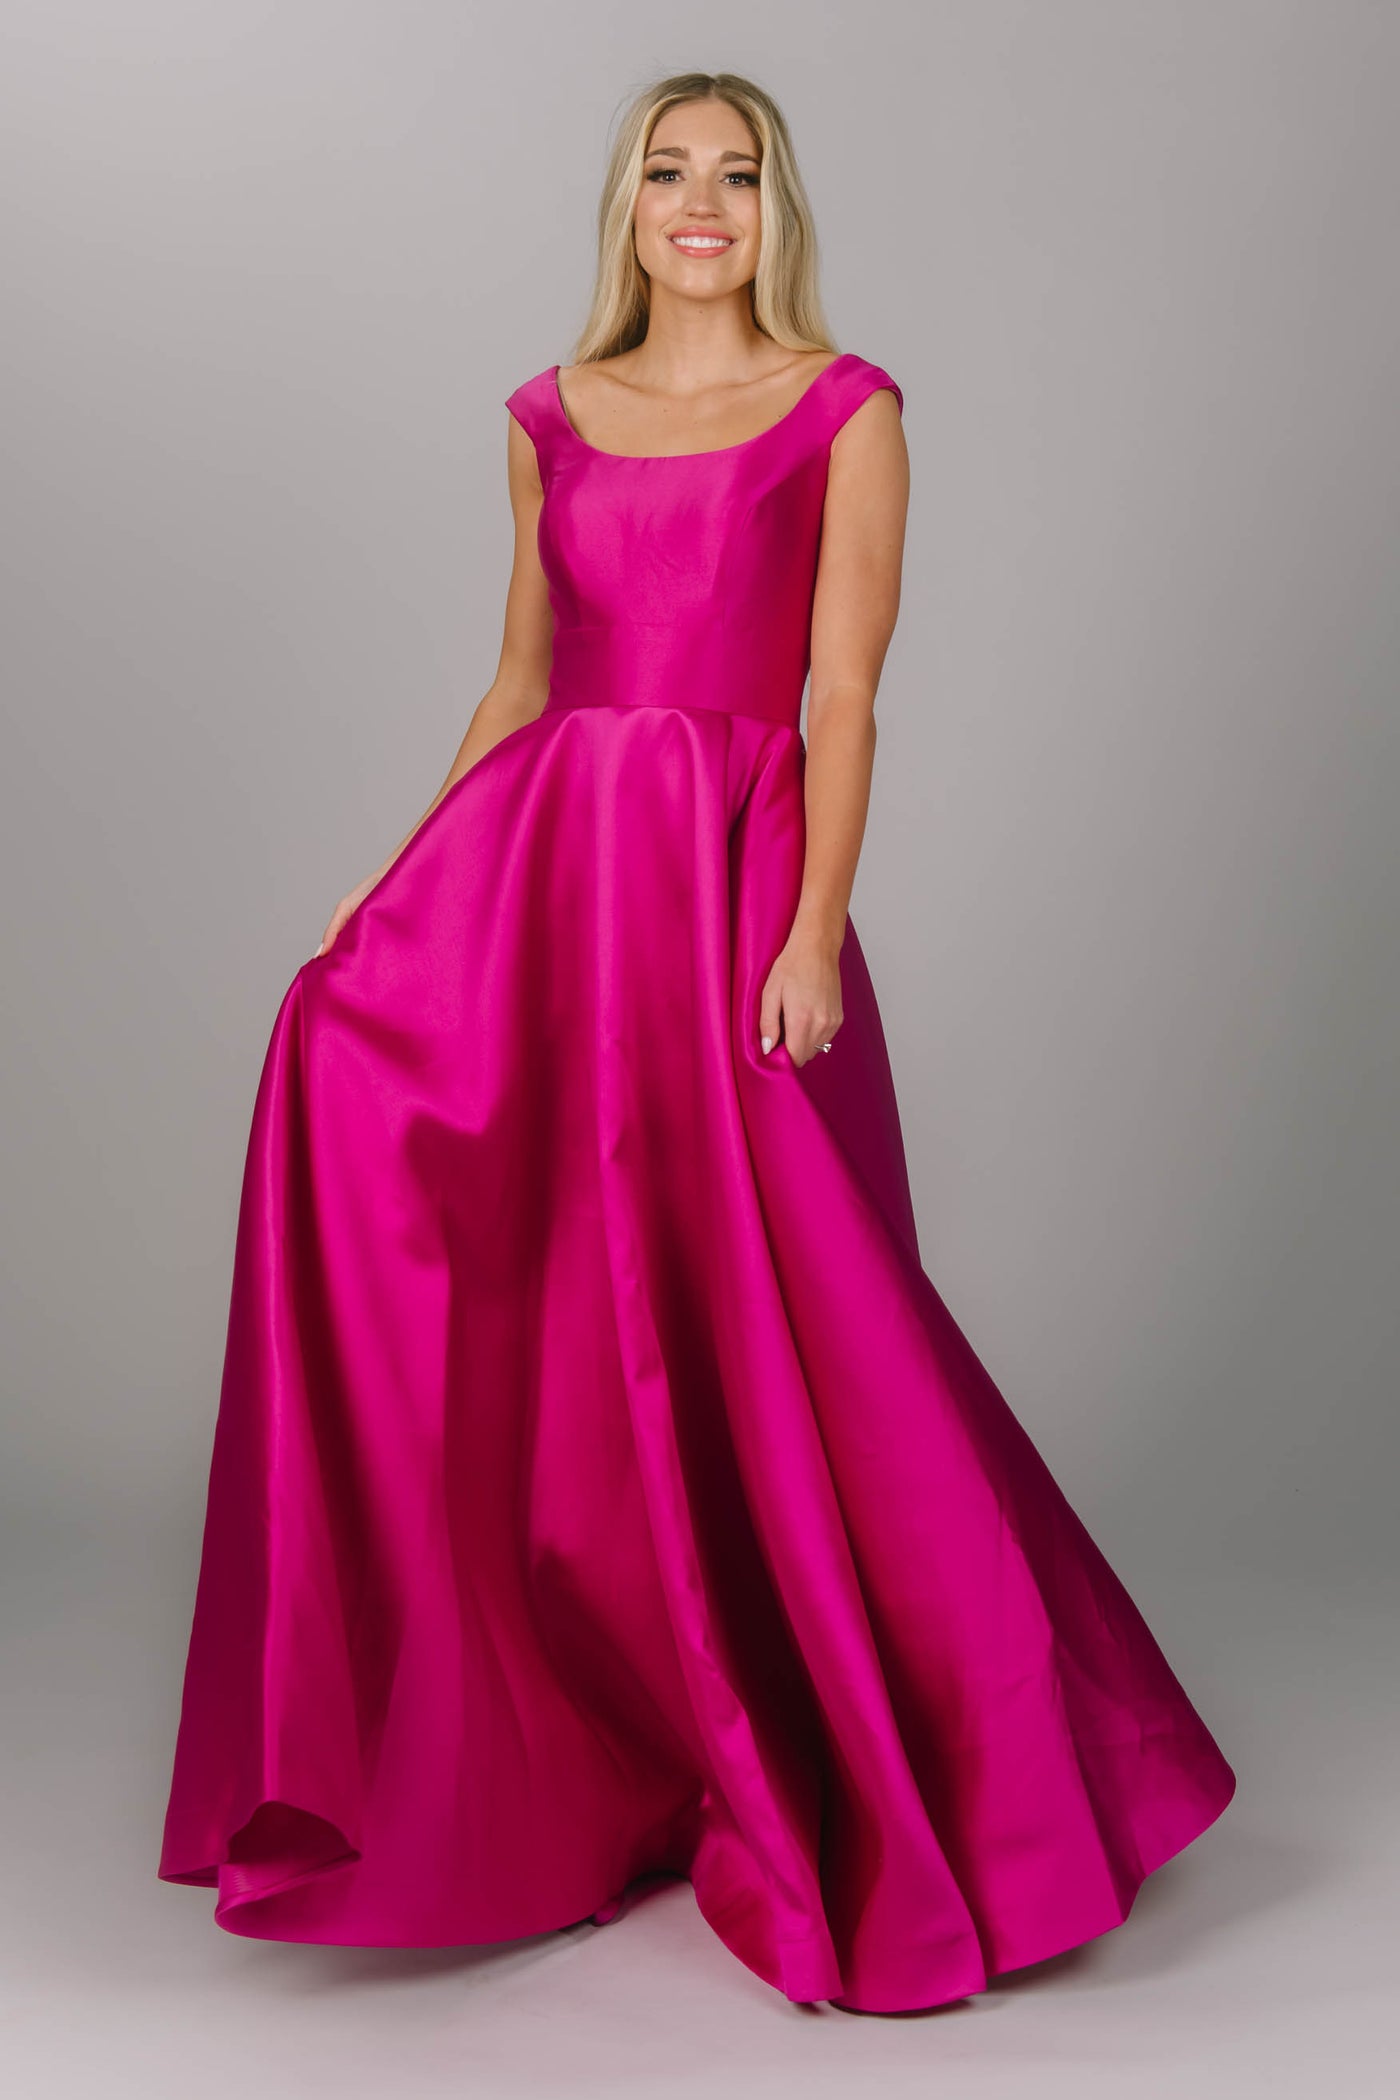 Pink modest prom dress that has a scoop neckline and a-line skirt. It has pockets and is perfect for the modest prom girl.  